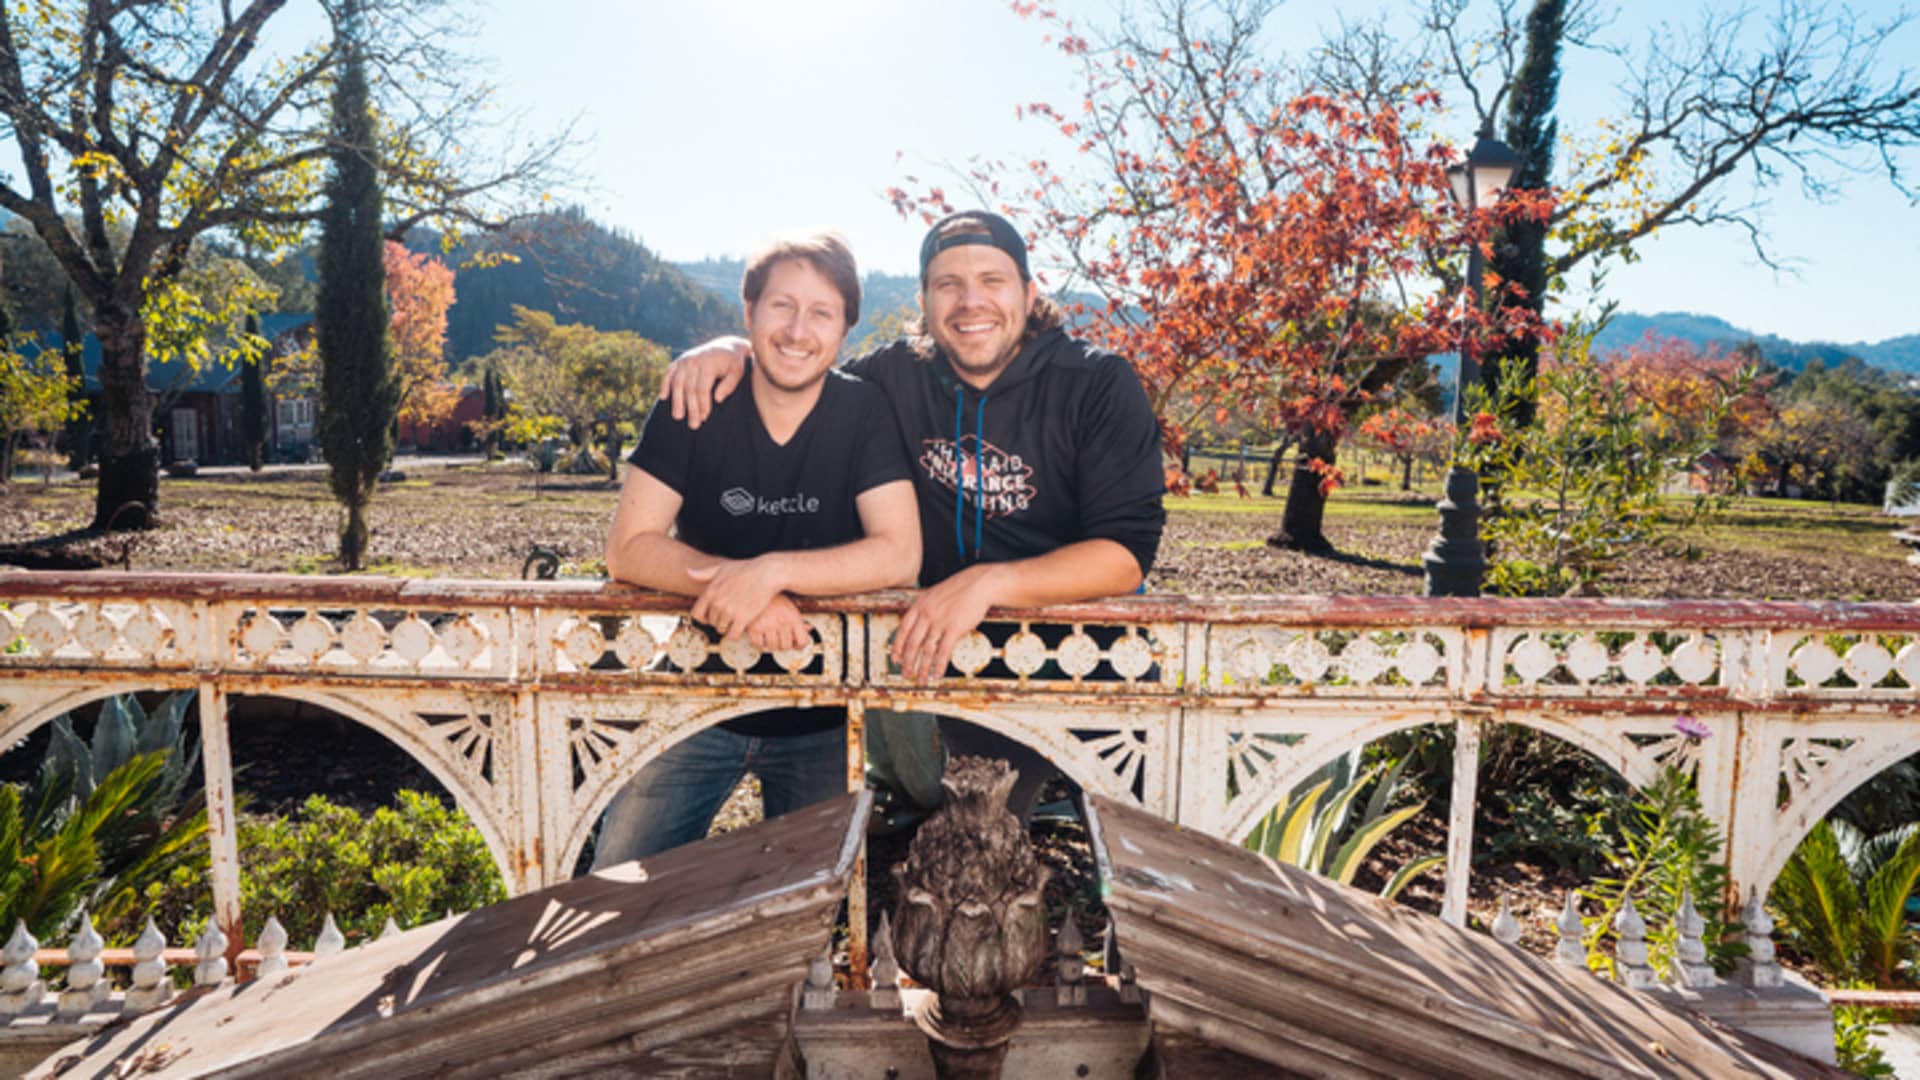 Kettle co-founders Nathaniel Manning, left, and Andrew Engler